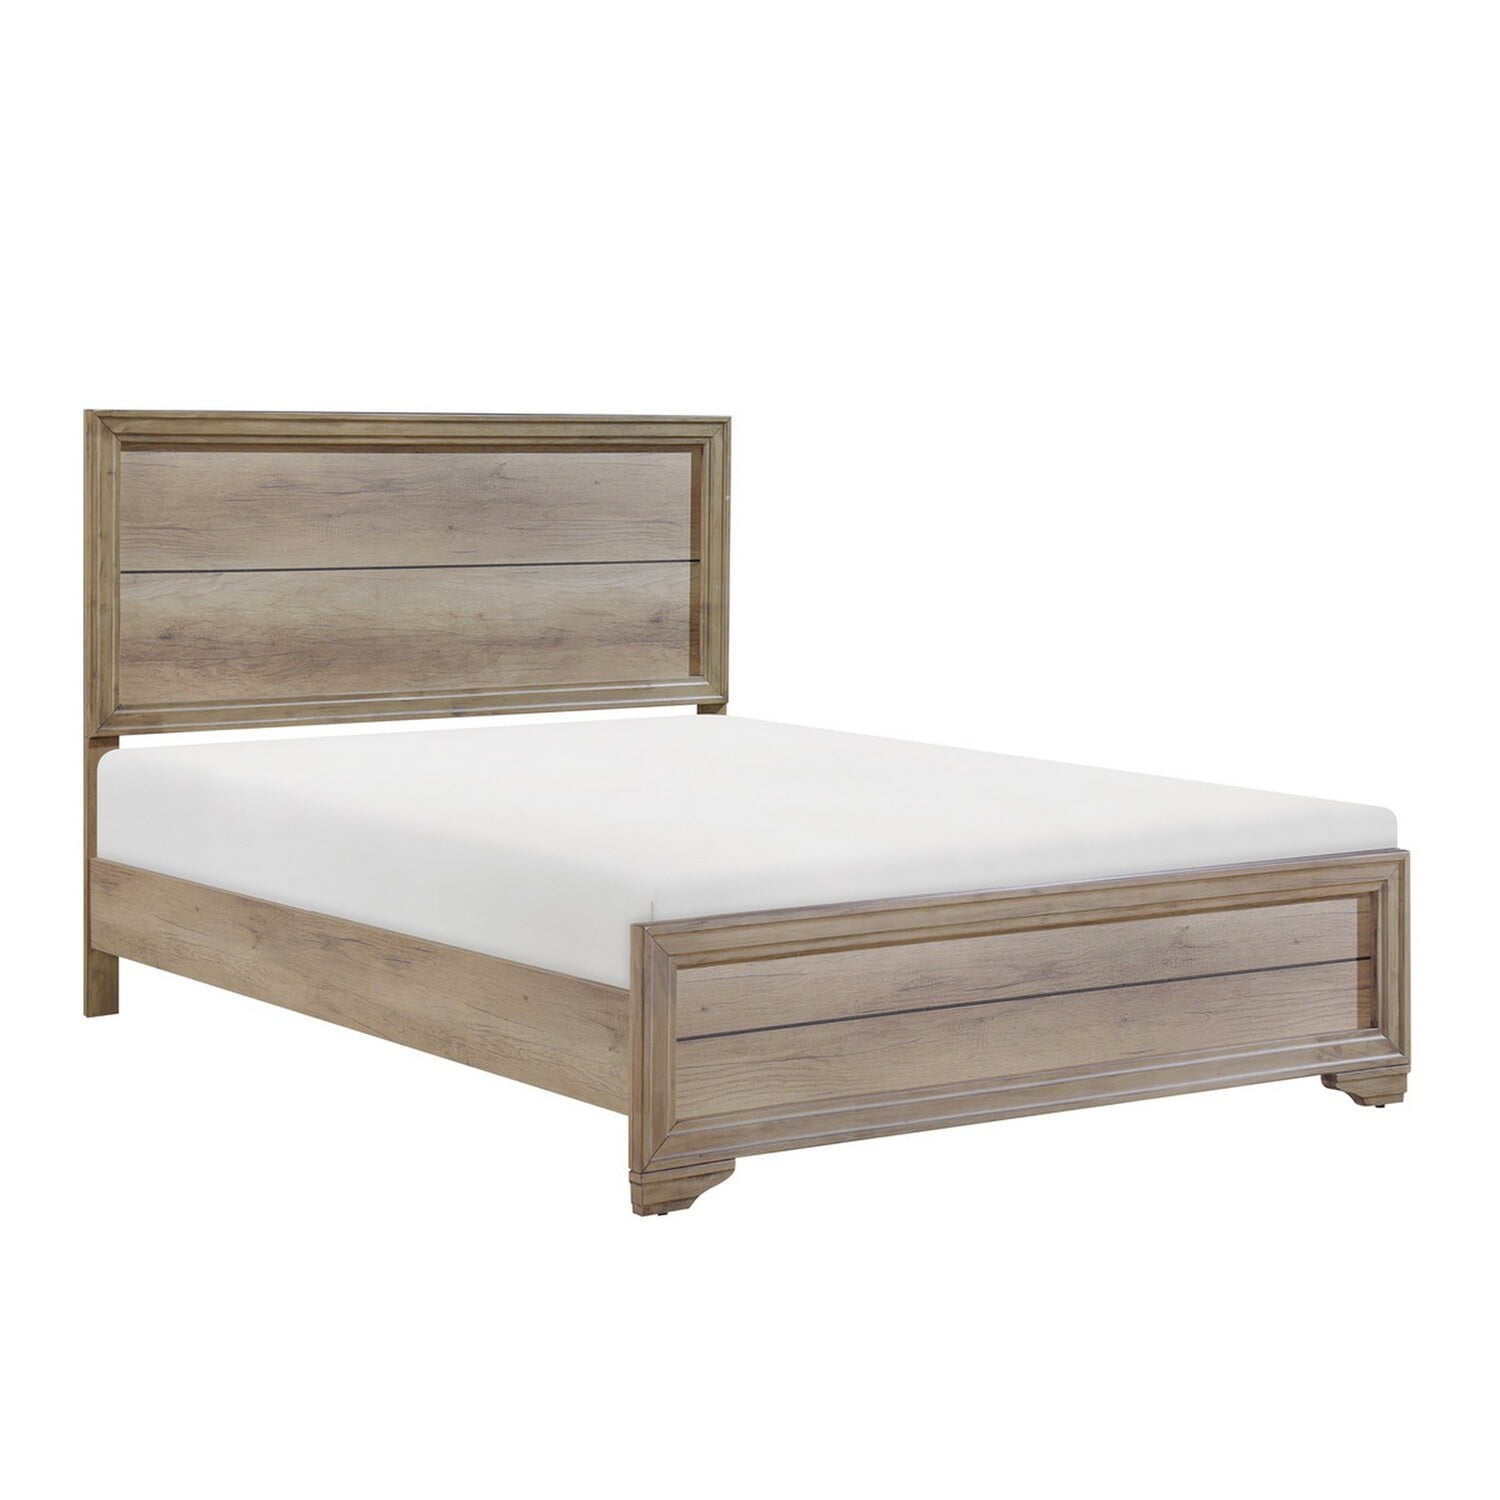 BM295827 52.5 x 83.5 x 63 in. Contemporary Queen Size Bed with Rustic Wood Panel Headboard, Natural Brown -  Benjara